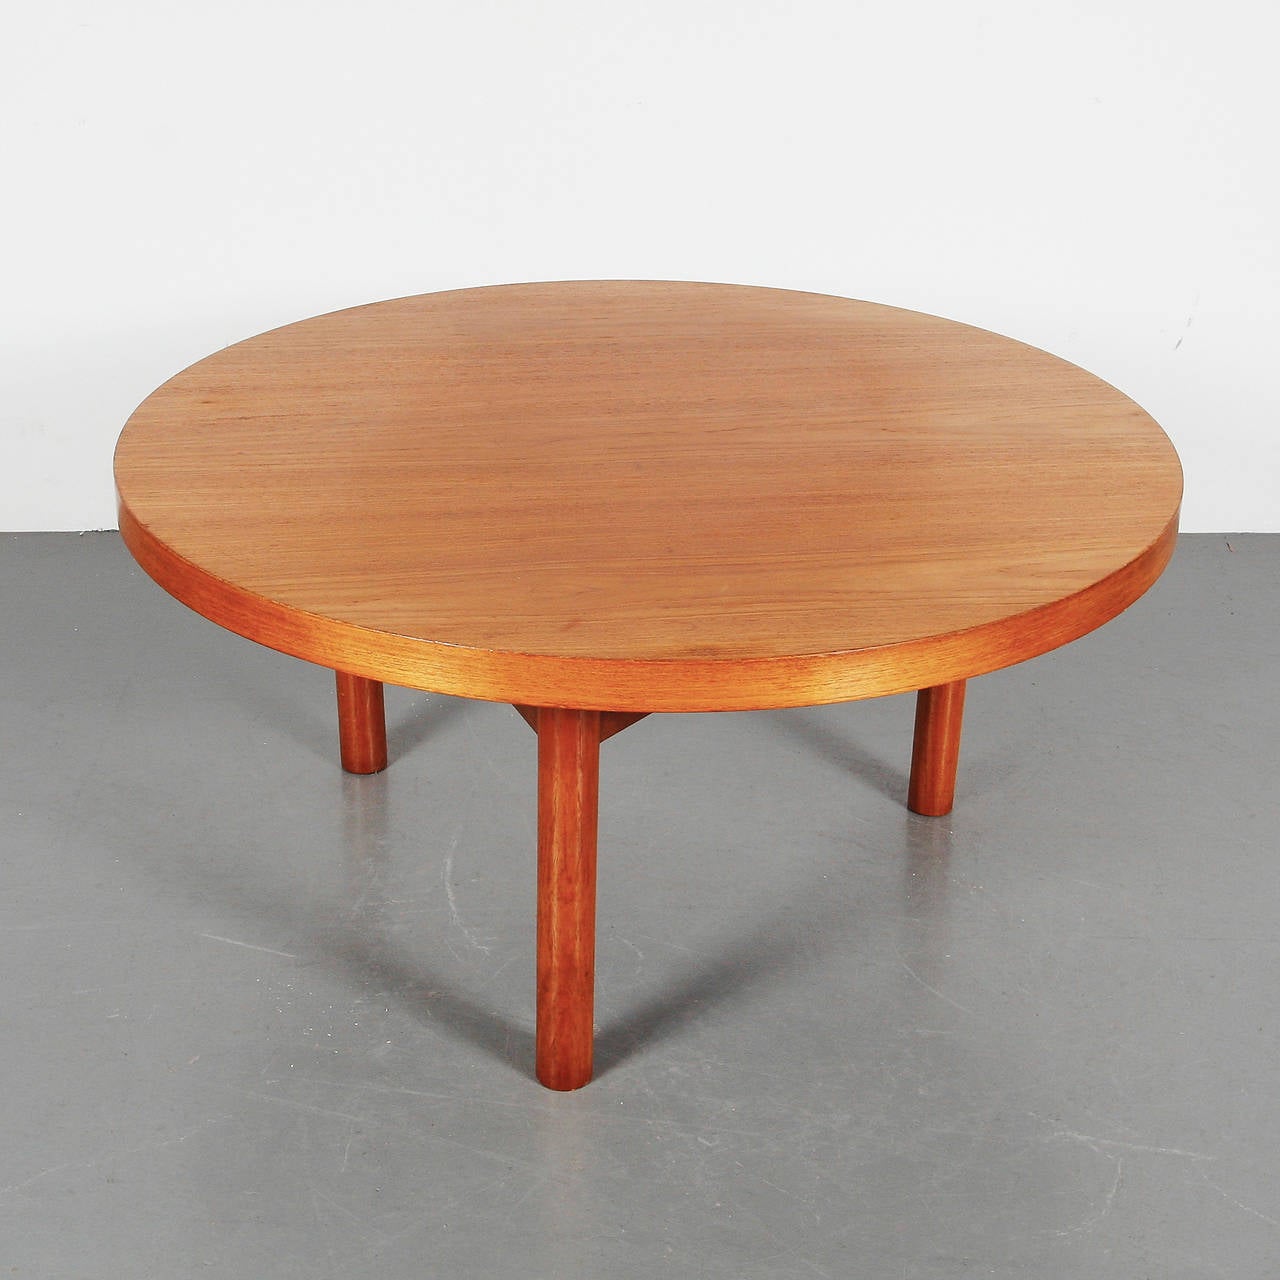 Coffee Table designed by Kho Liang Le around 1950.
Manufactured by Artifort (Netherlands).
Wood legs and table top.

In good original condition, with minor wear consistent with age and use, preserving a beautiful patina.

Kho Liang Ie (1927- 